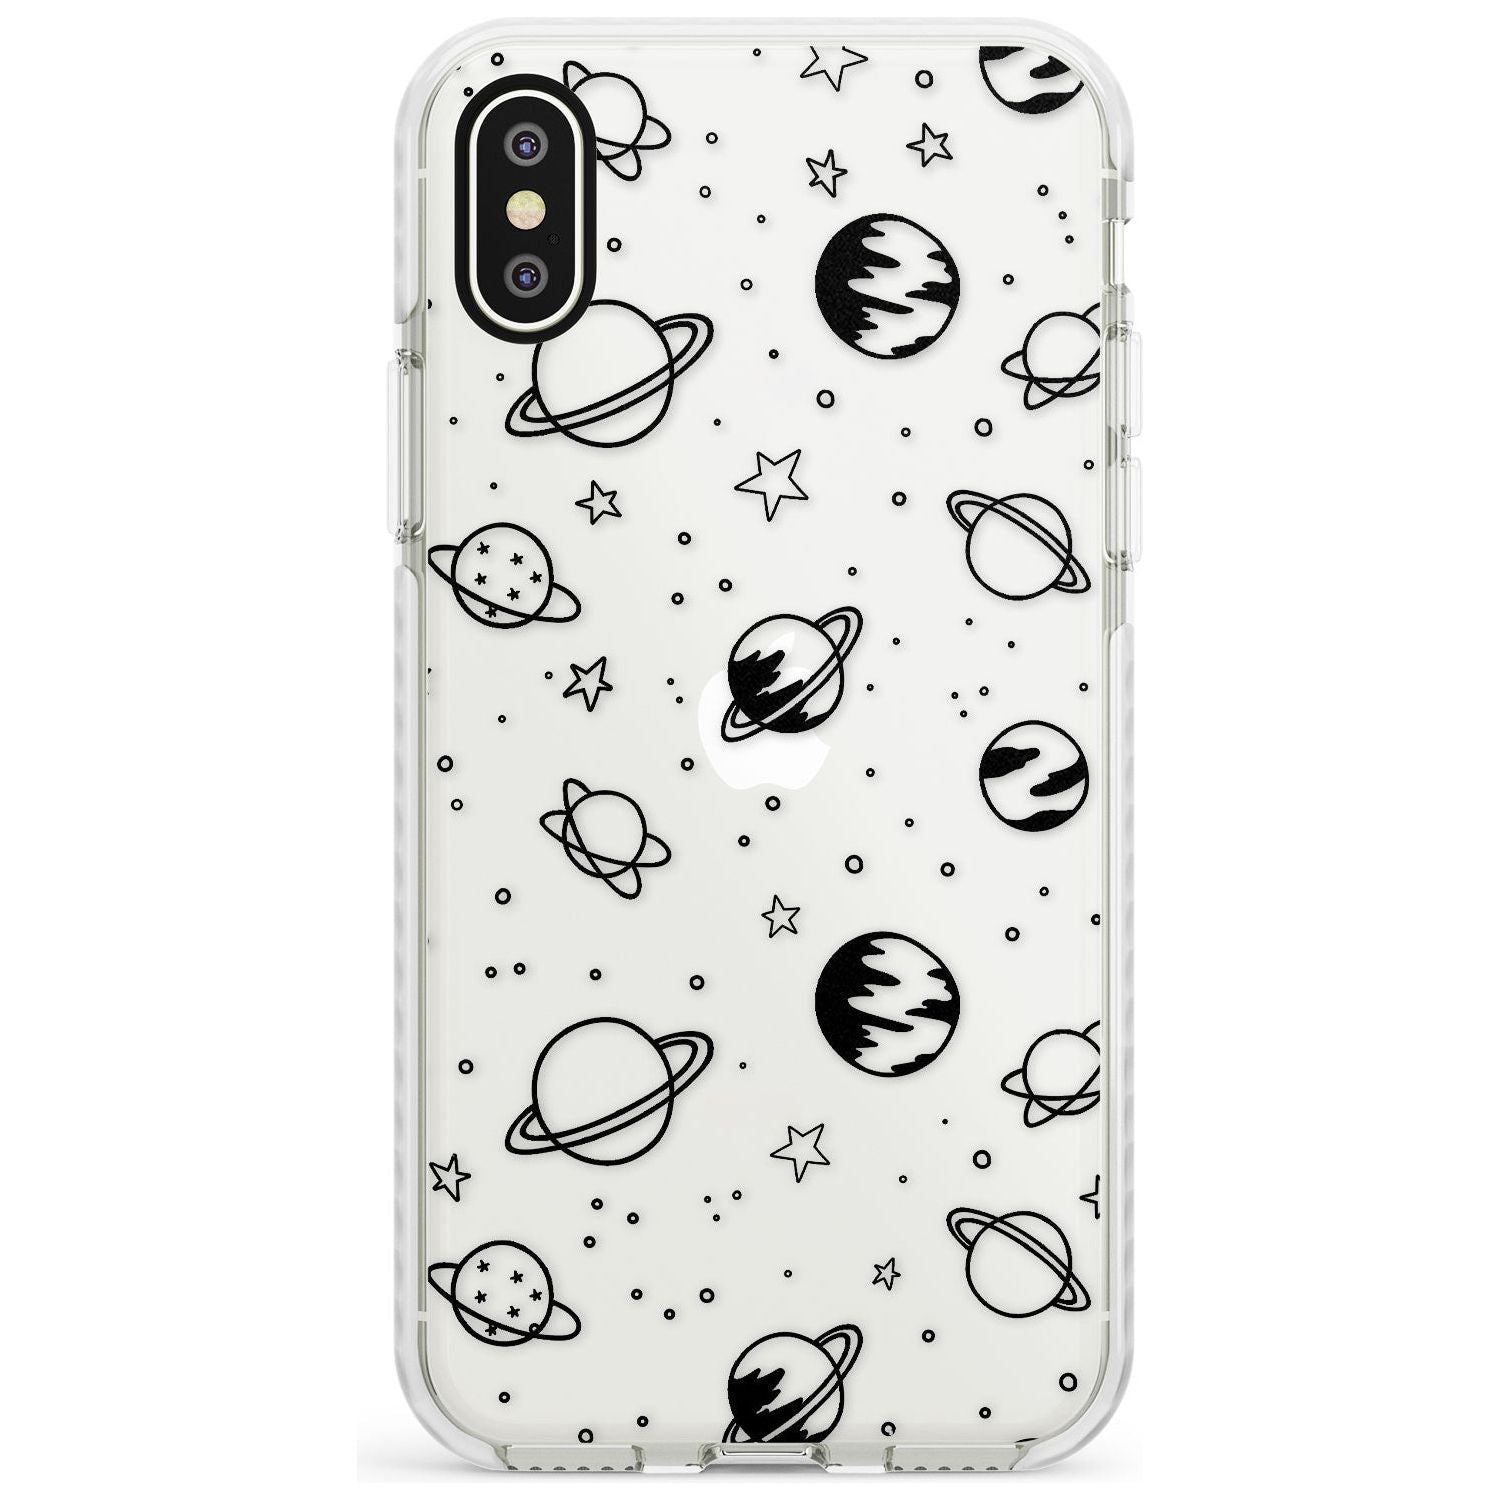 Outer Space Outlines: Black on Clear Slim TPU Phone Case Warehouse X XS Max XR